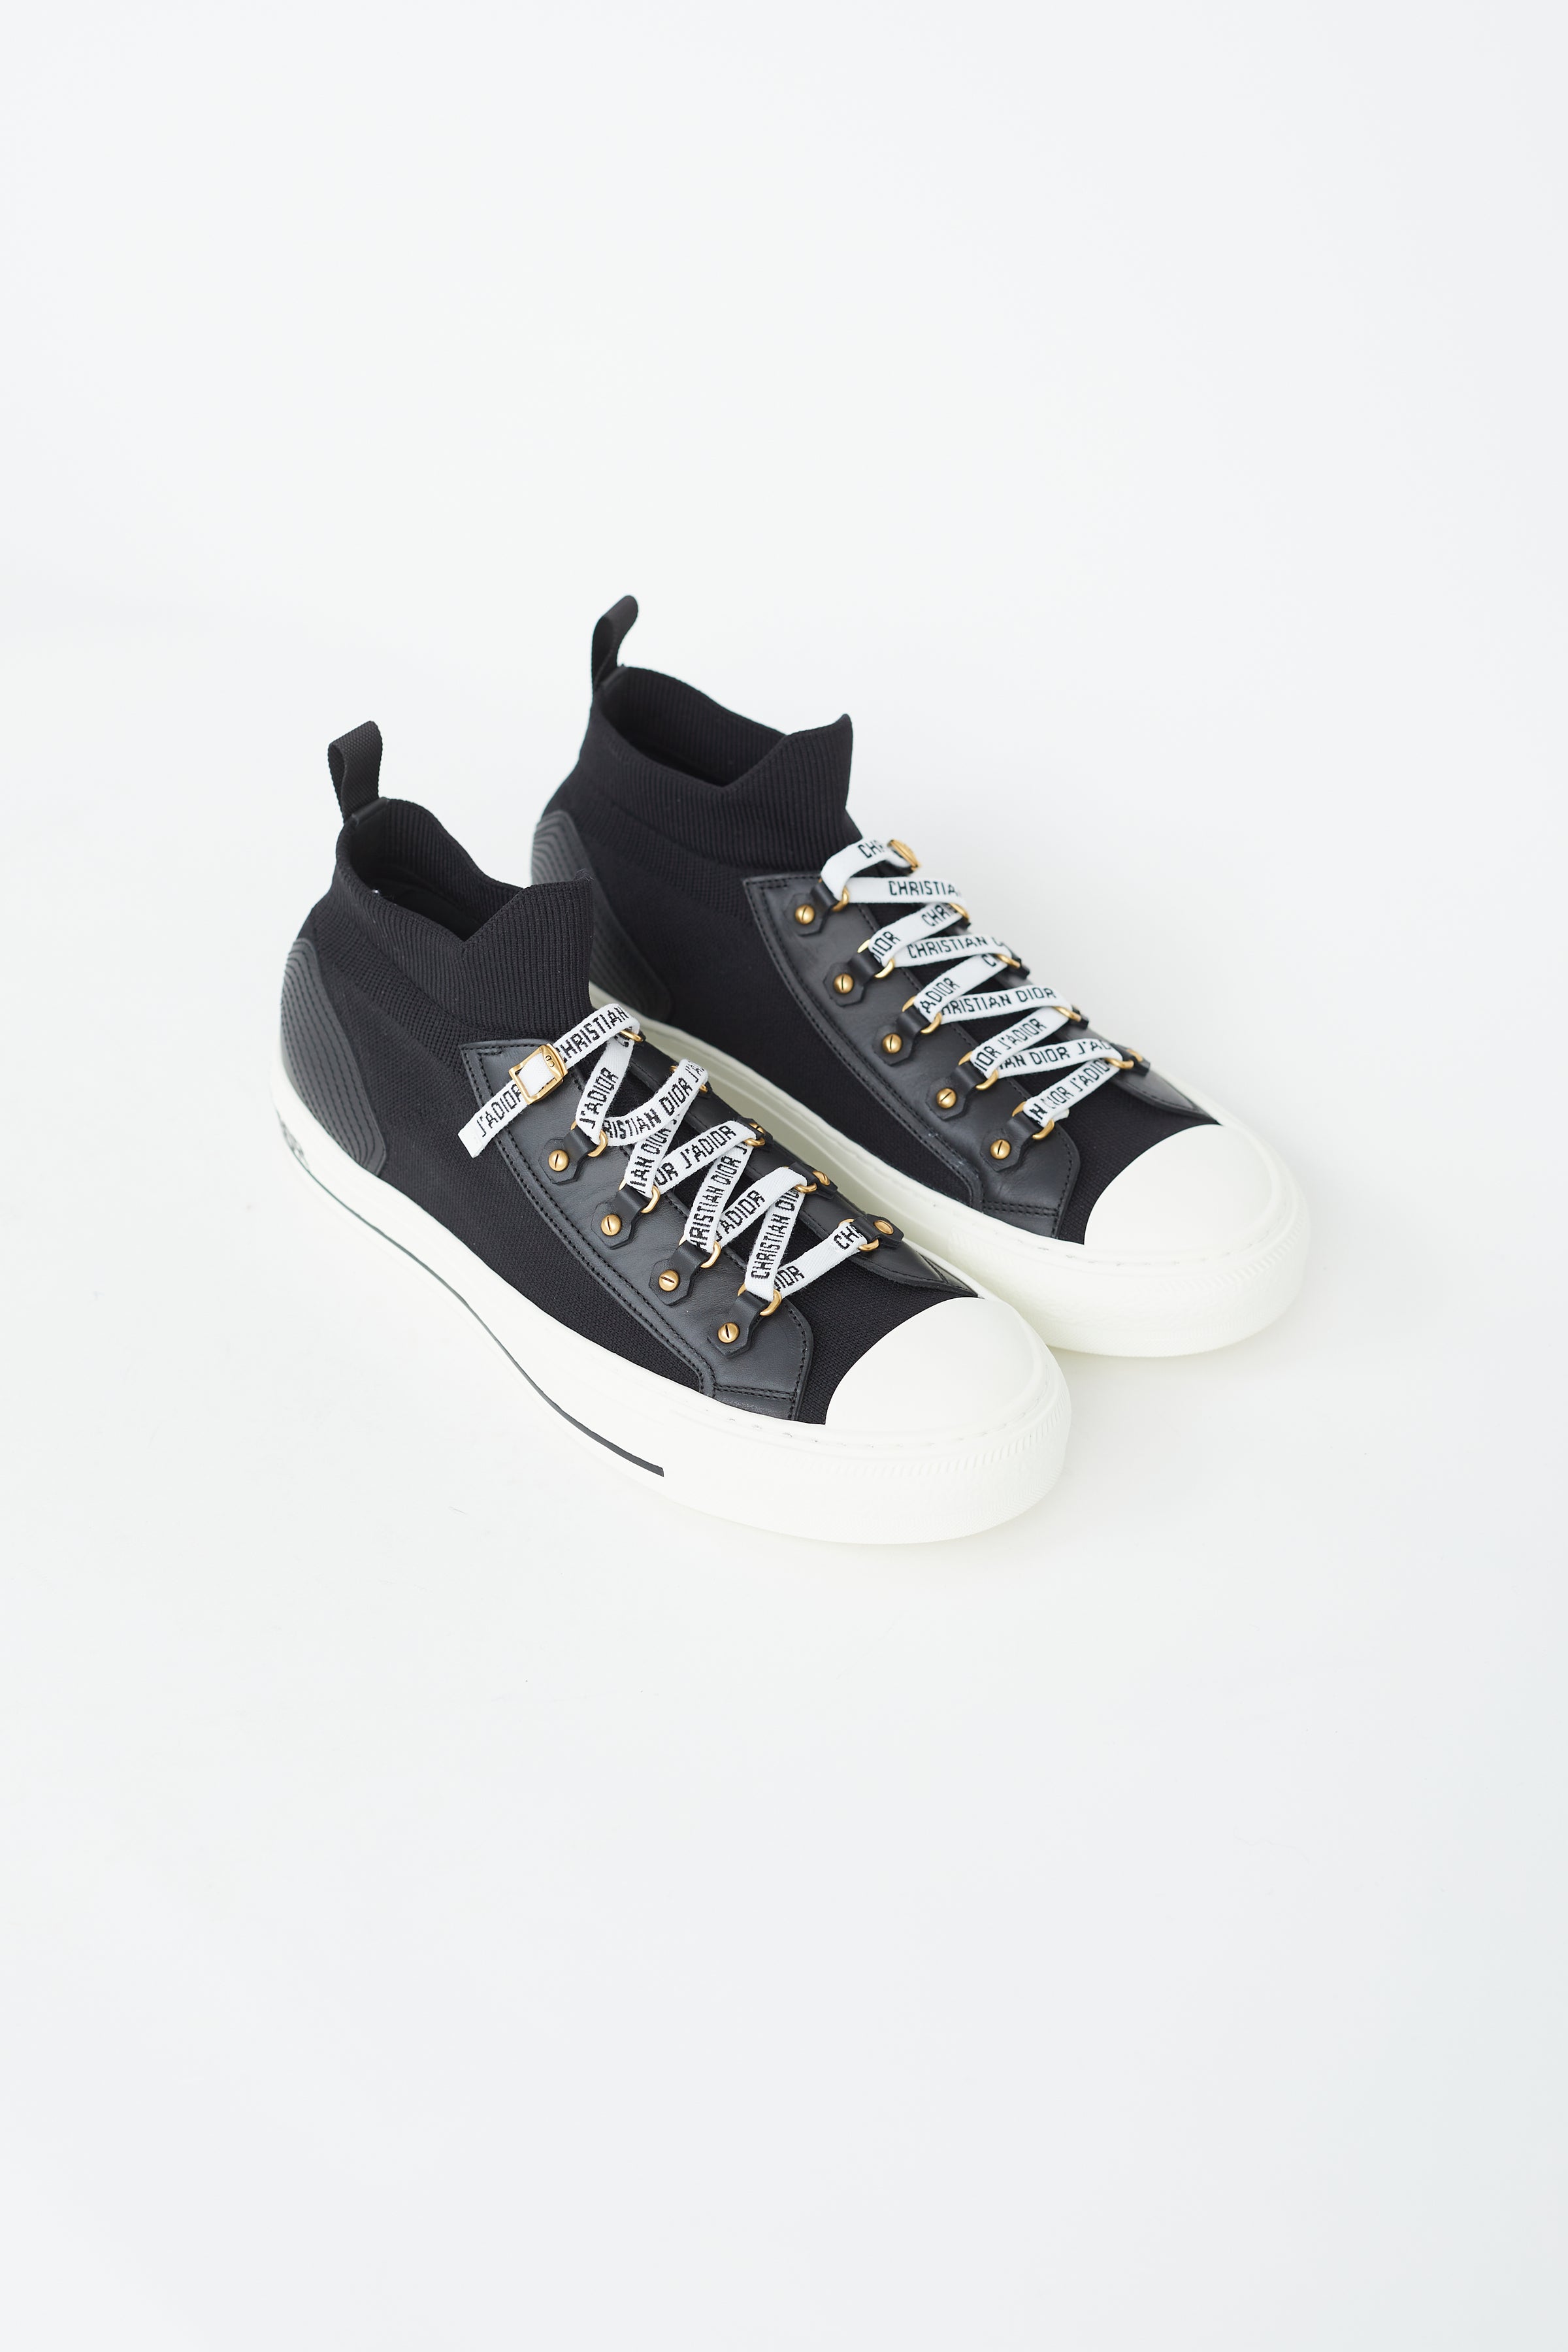 Dior Black/White Technical Knit and Leather Walk'n'Dior High Top Sneakers  Size 36 Dior